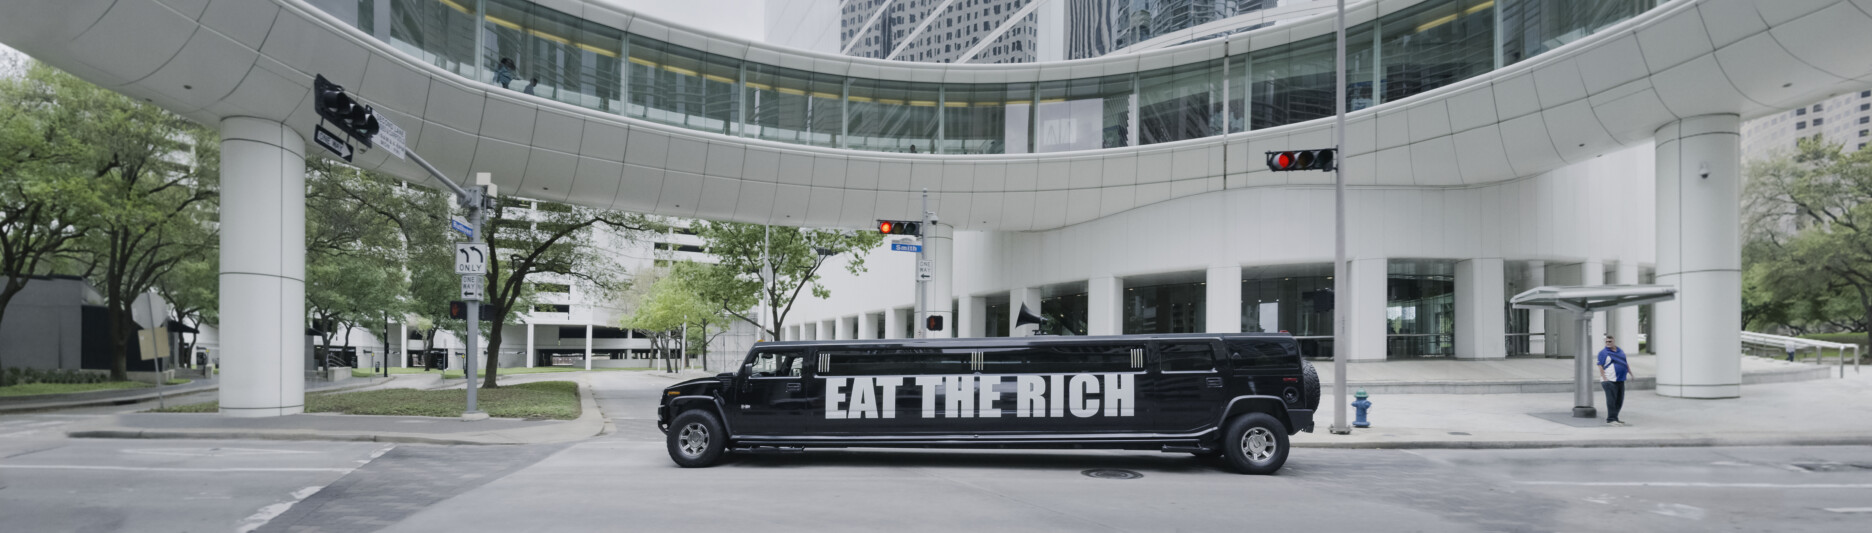 An artwork by Democracia from Act I of ORDER. This is a panoramic photo of a black stretch limo with the words EAT THE RICH in white on the side. The limo is moving through a city street in a financial district.